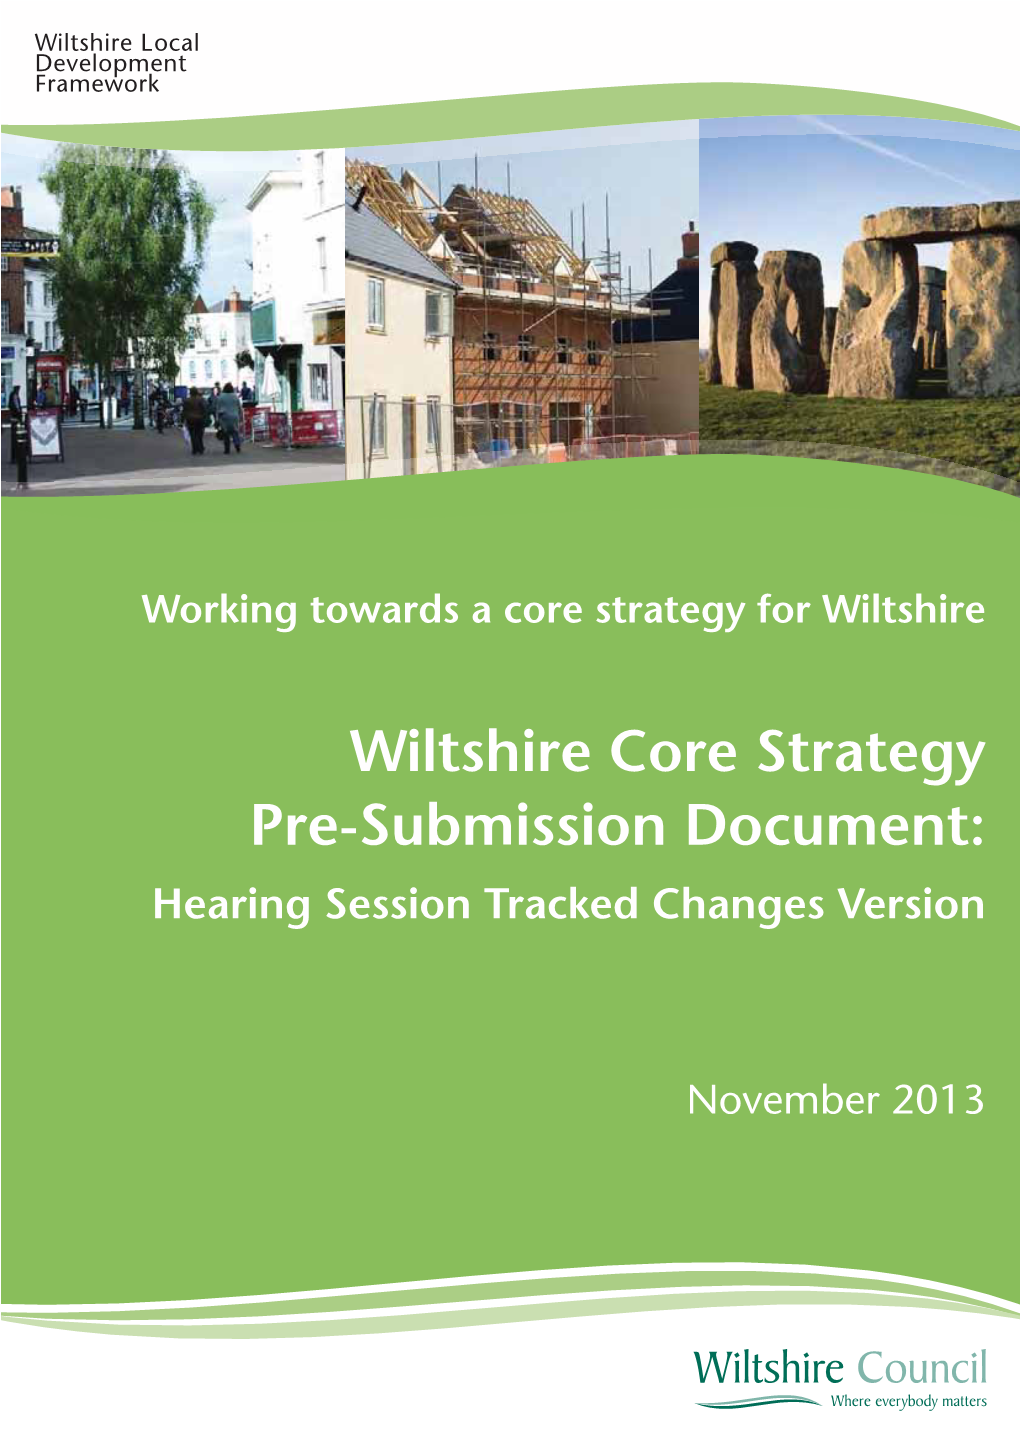 Wiltshire Core Strategy Pre-Submission Document: Hearing Session Tracked Changes Version